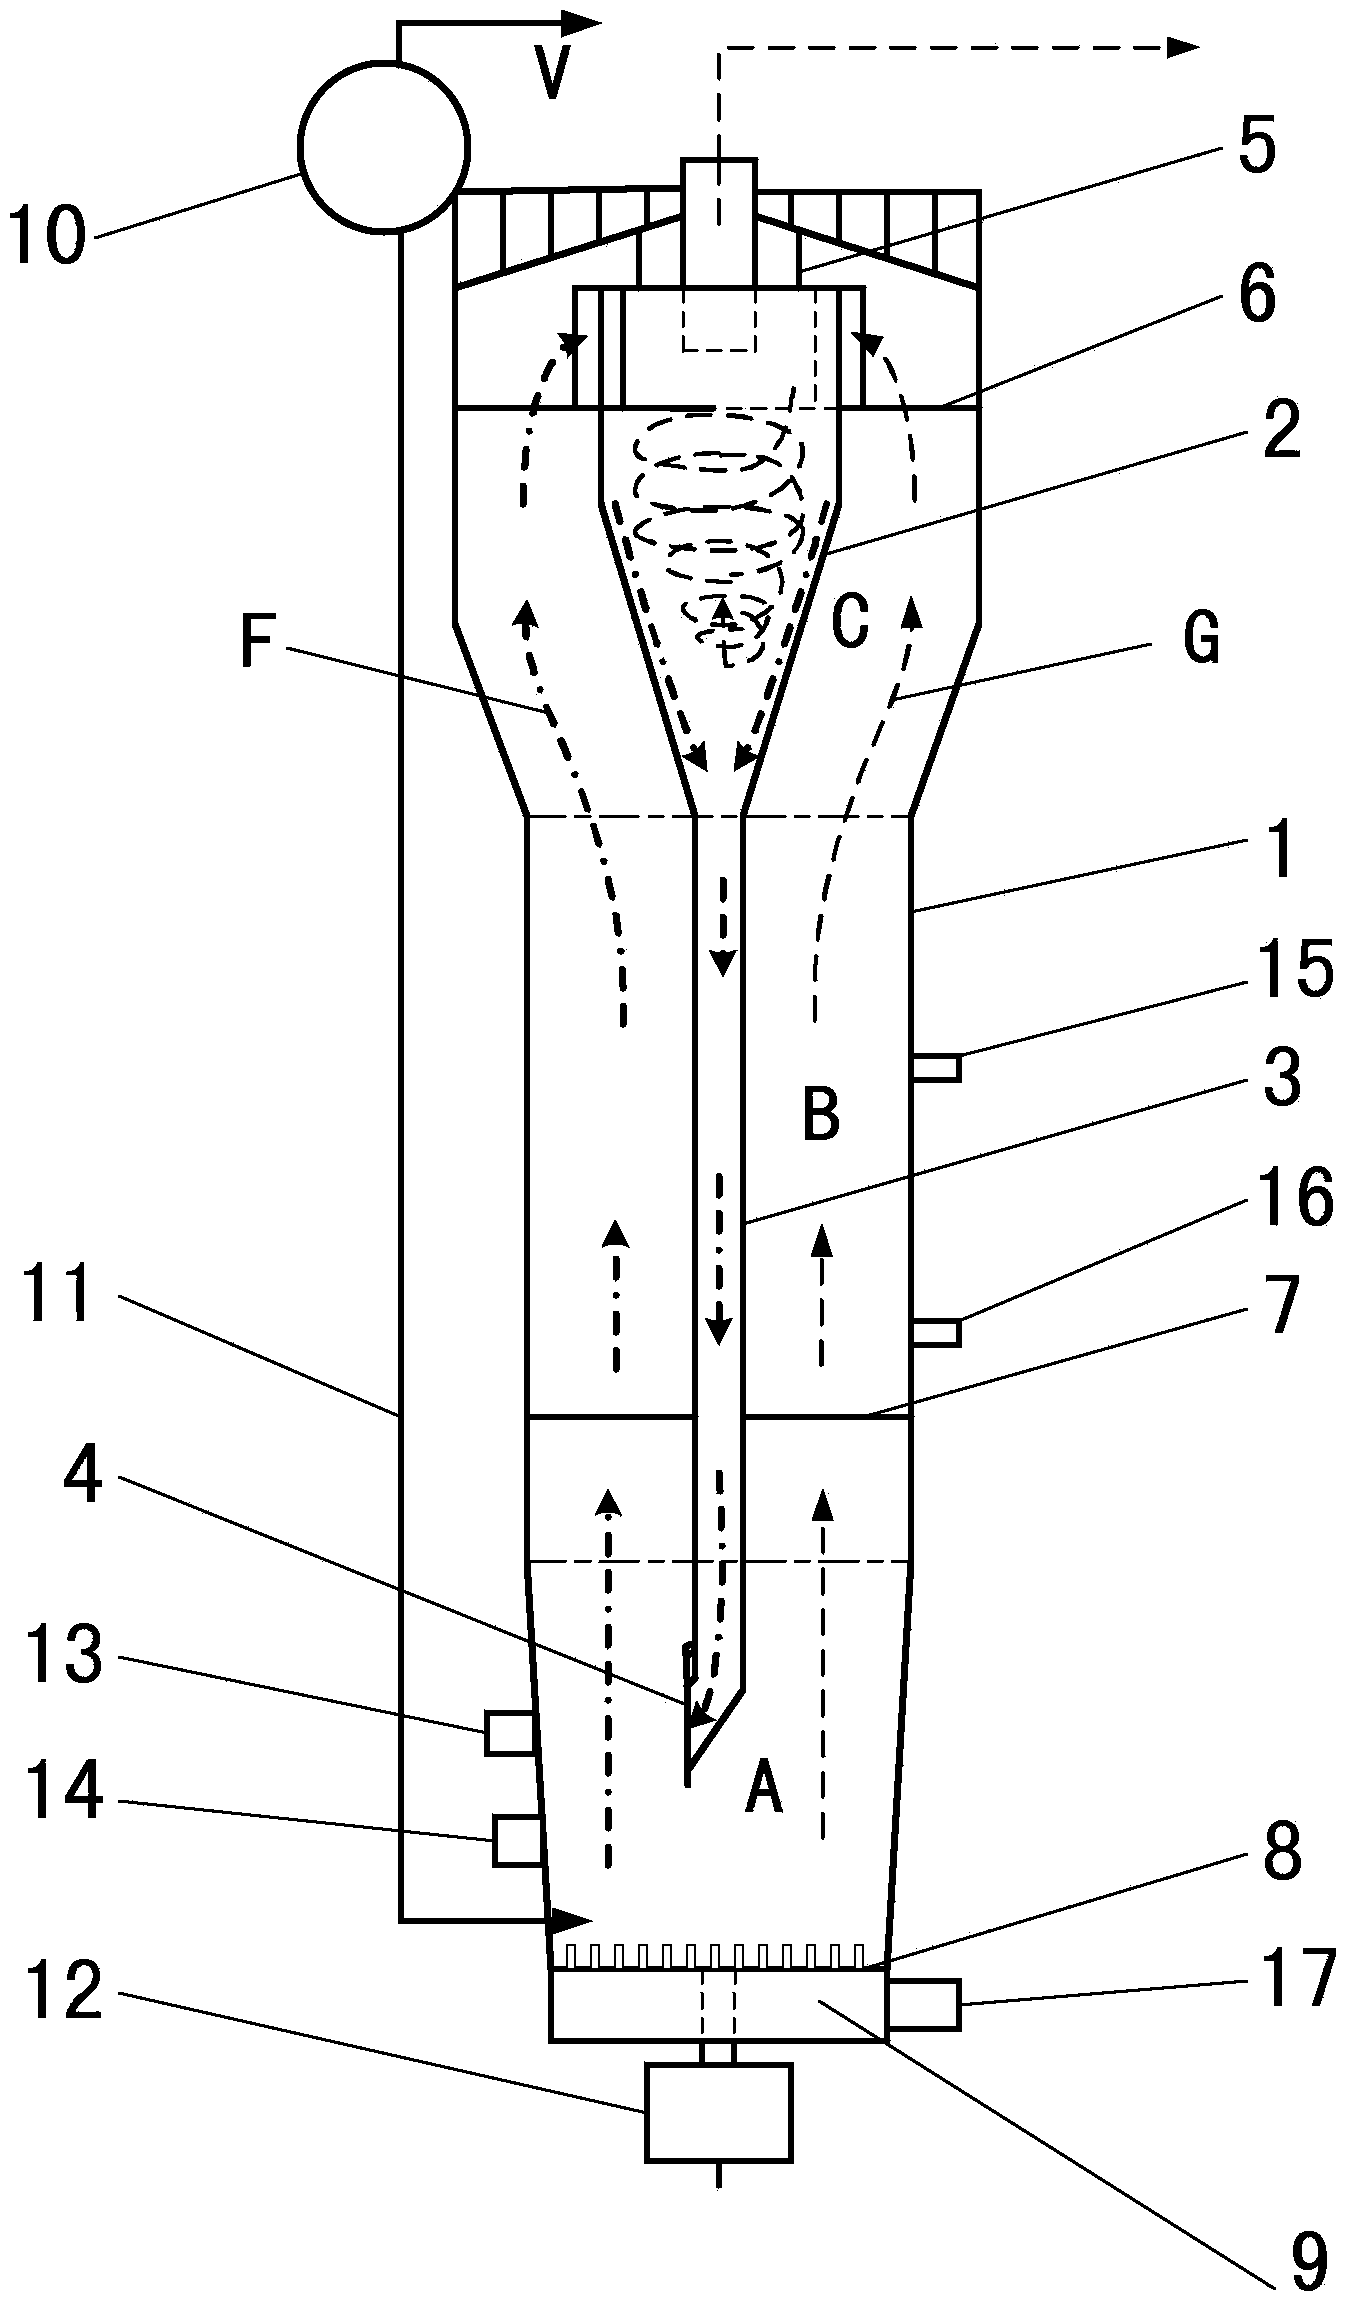 Circulating fluidized bed combustion device with internal double-inlet cyclone separator